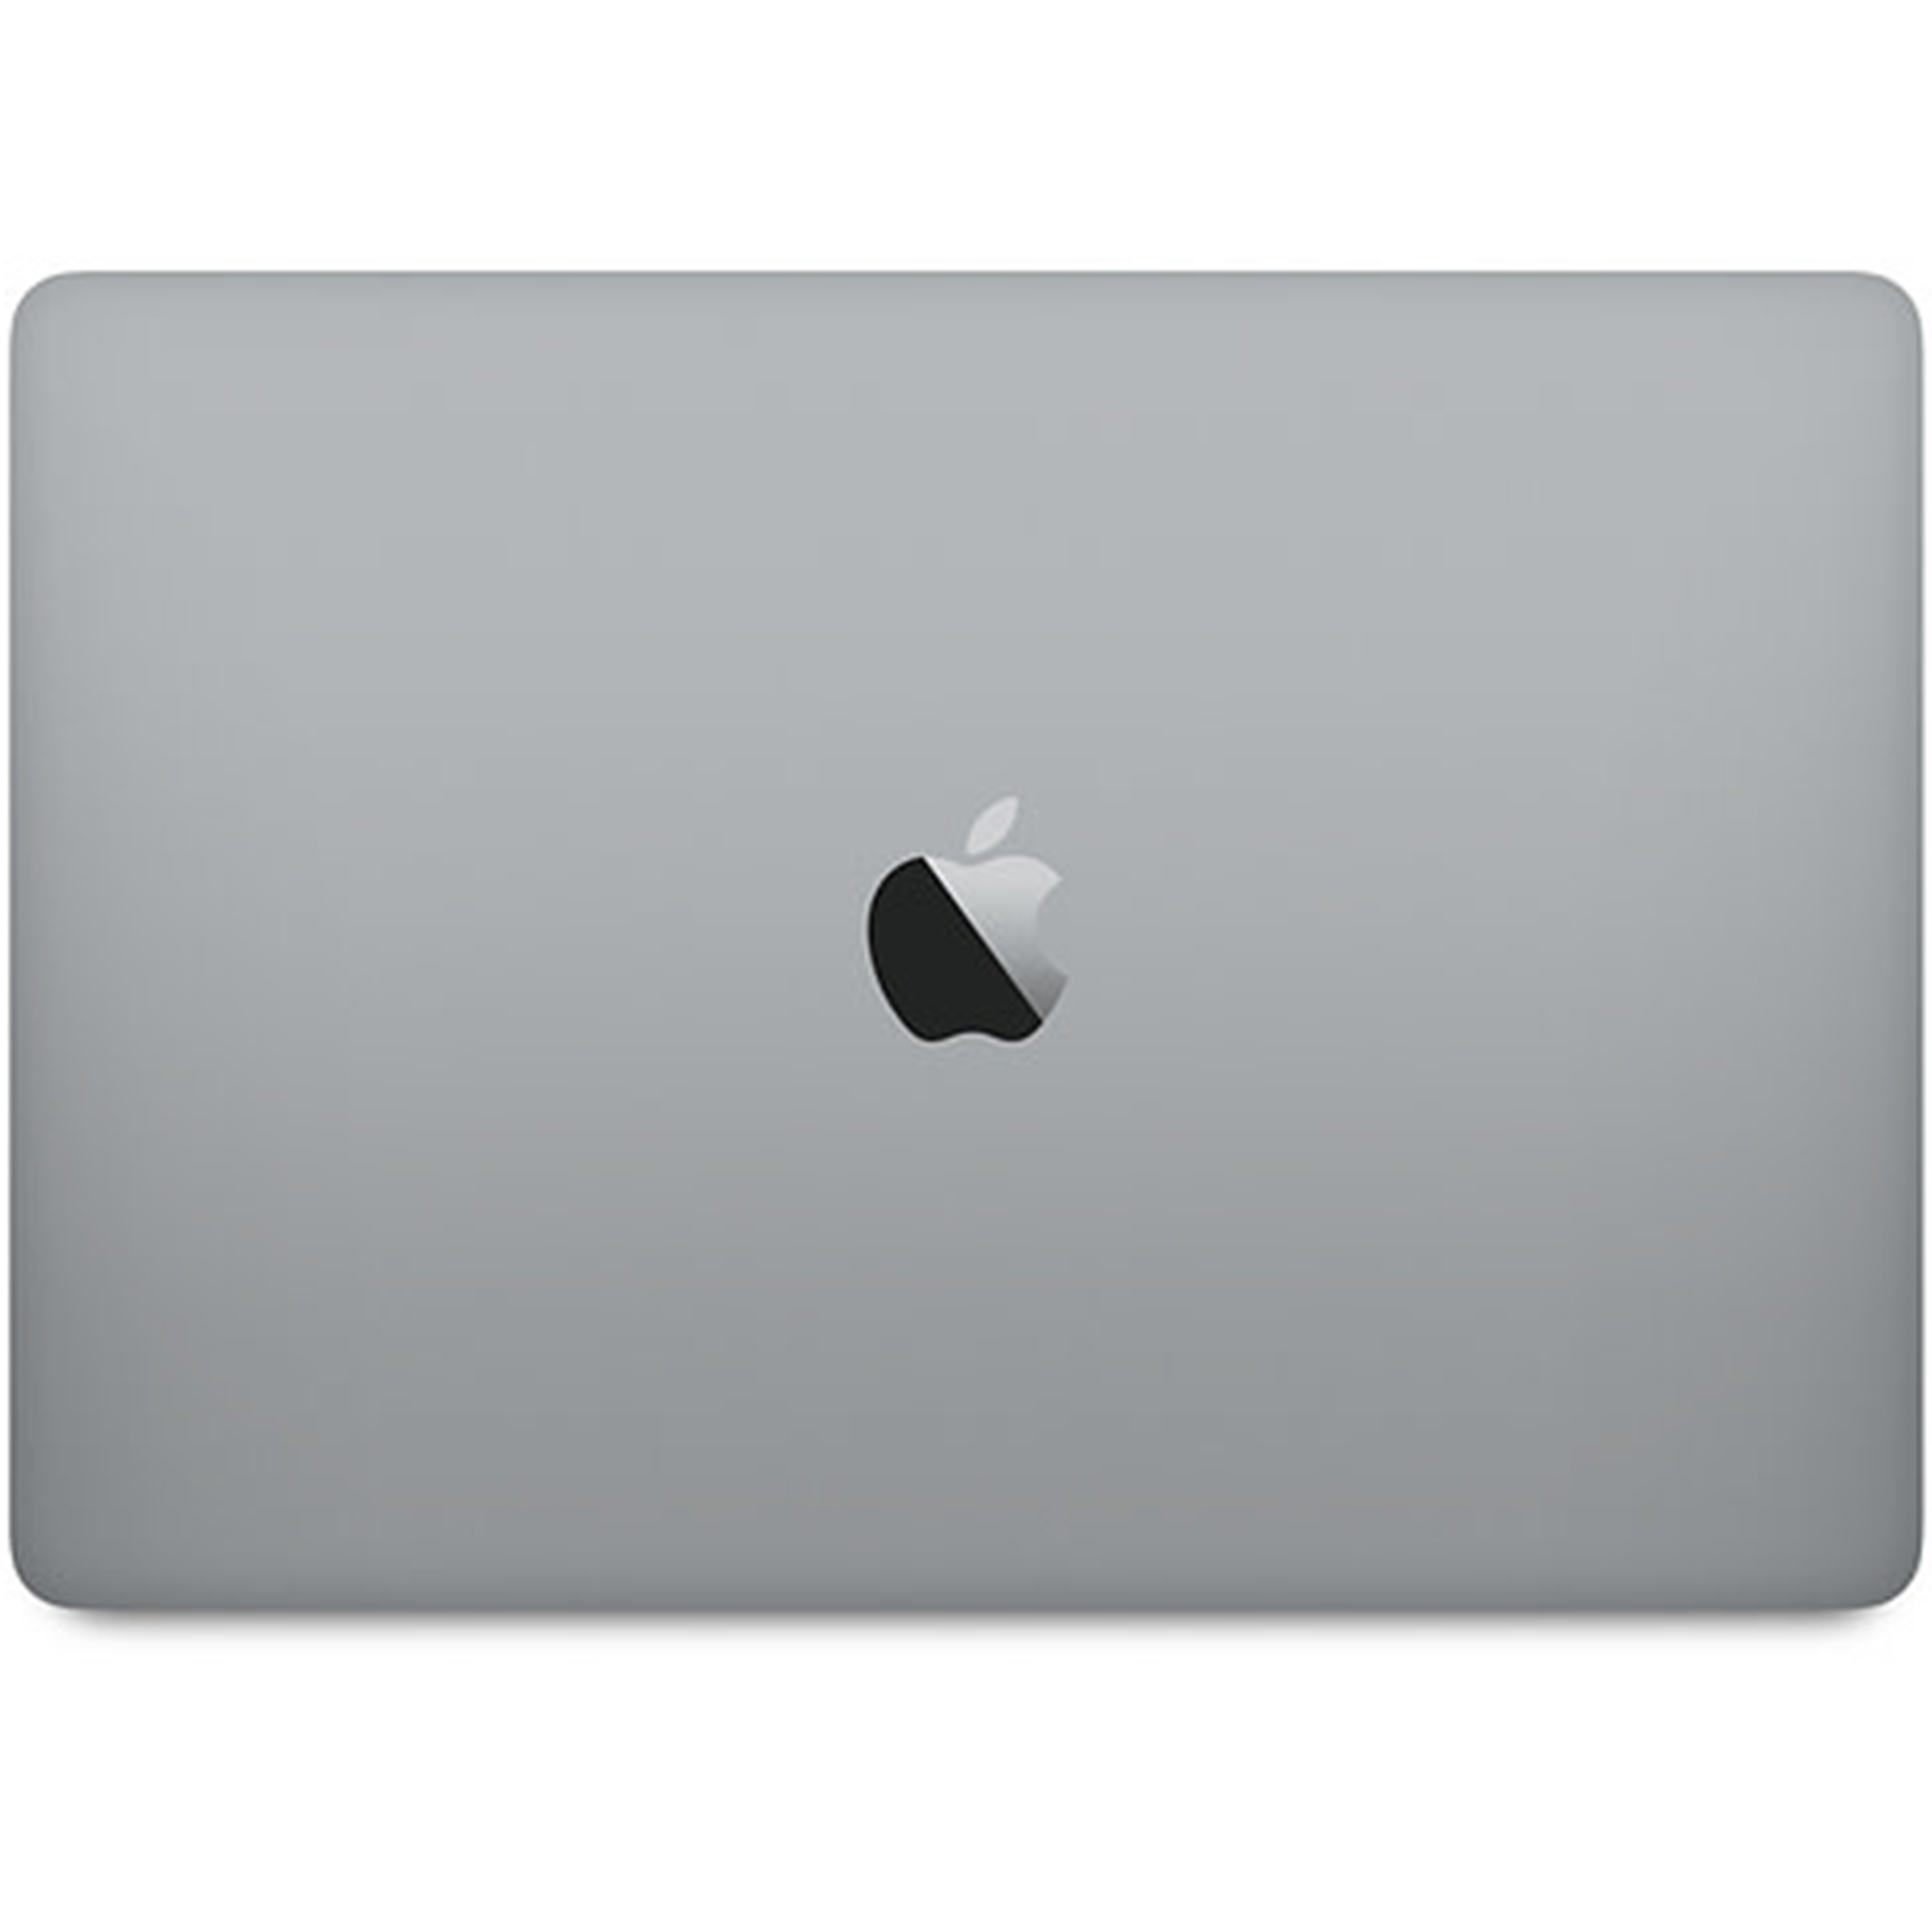 MacBook Pro 13.3-inch Laptop with Touch Bar - 2.4GHz Quad-Core i7 - 16